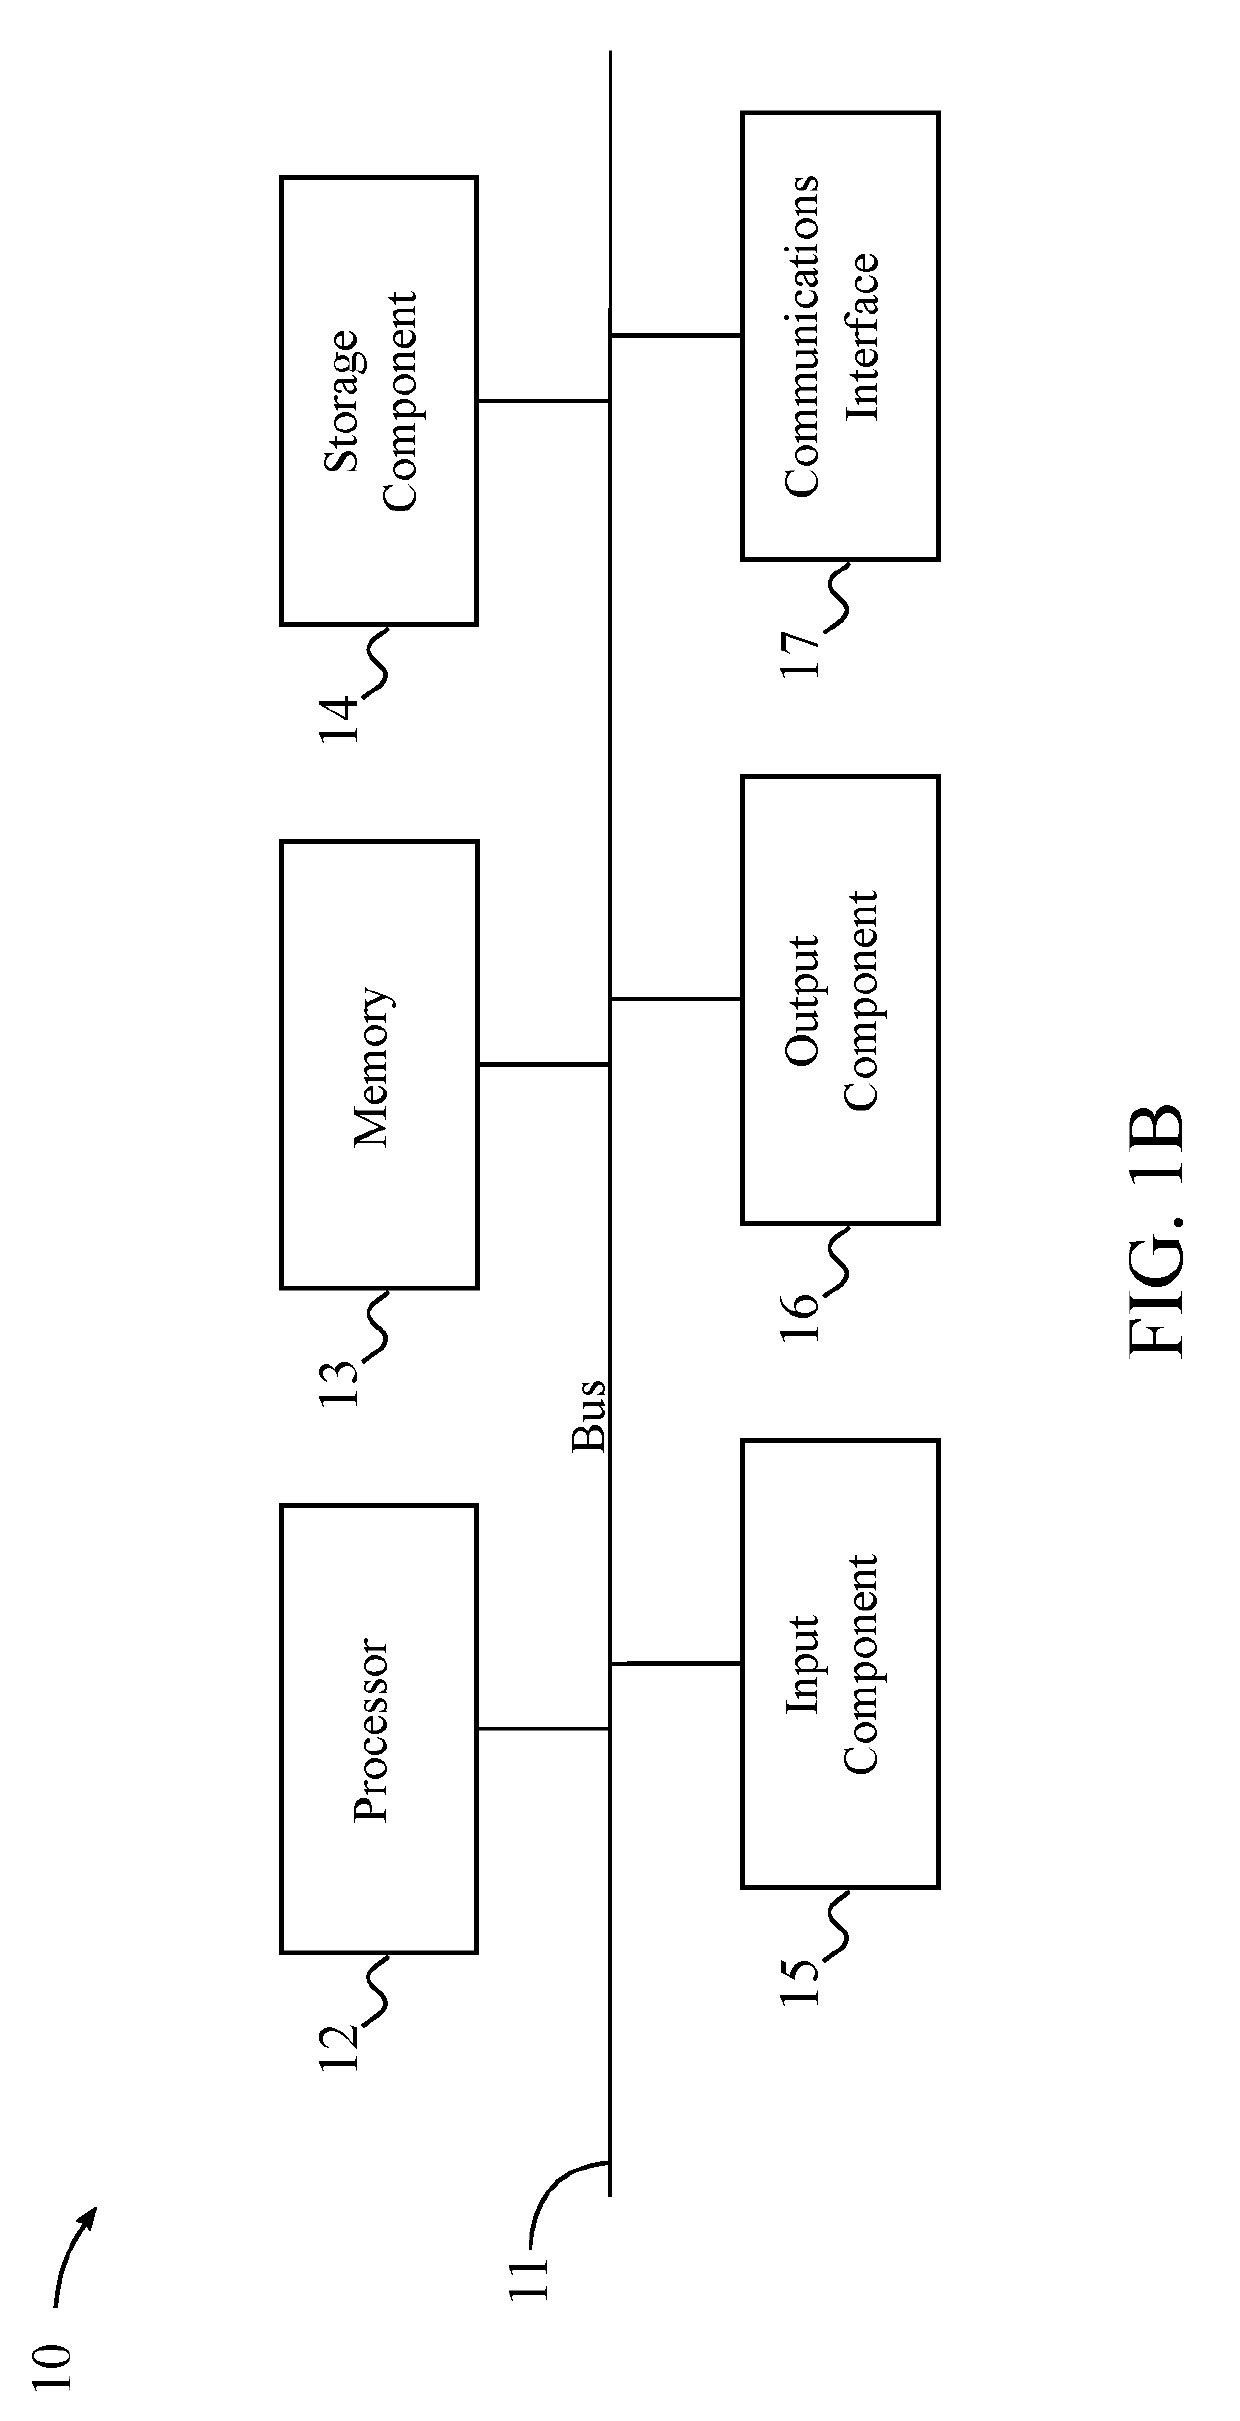 Secure storage systems and methods